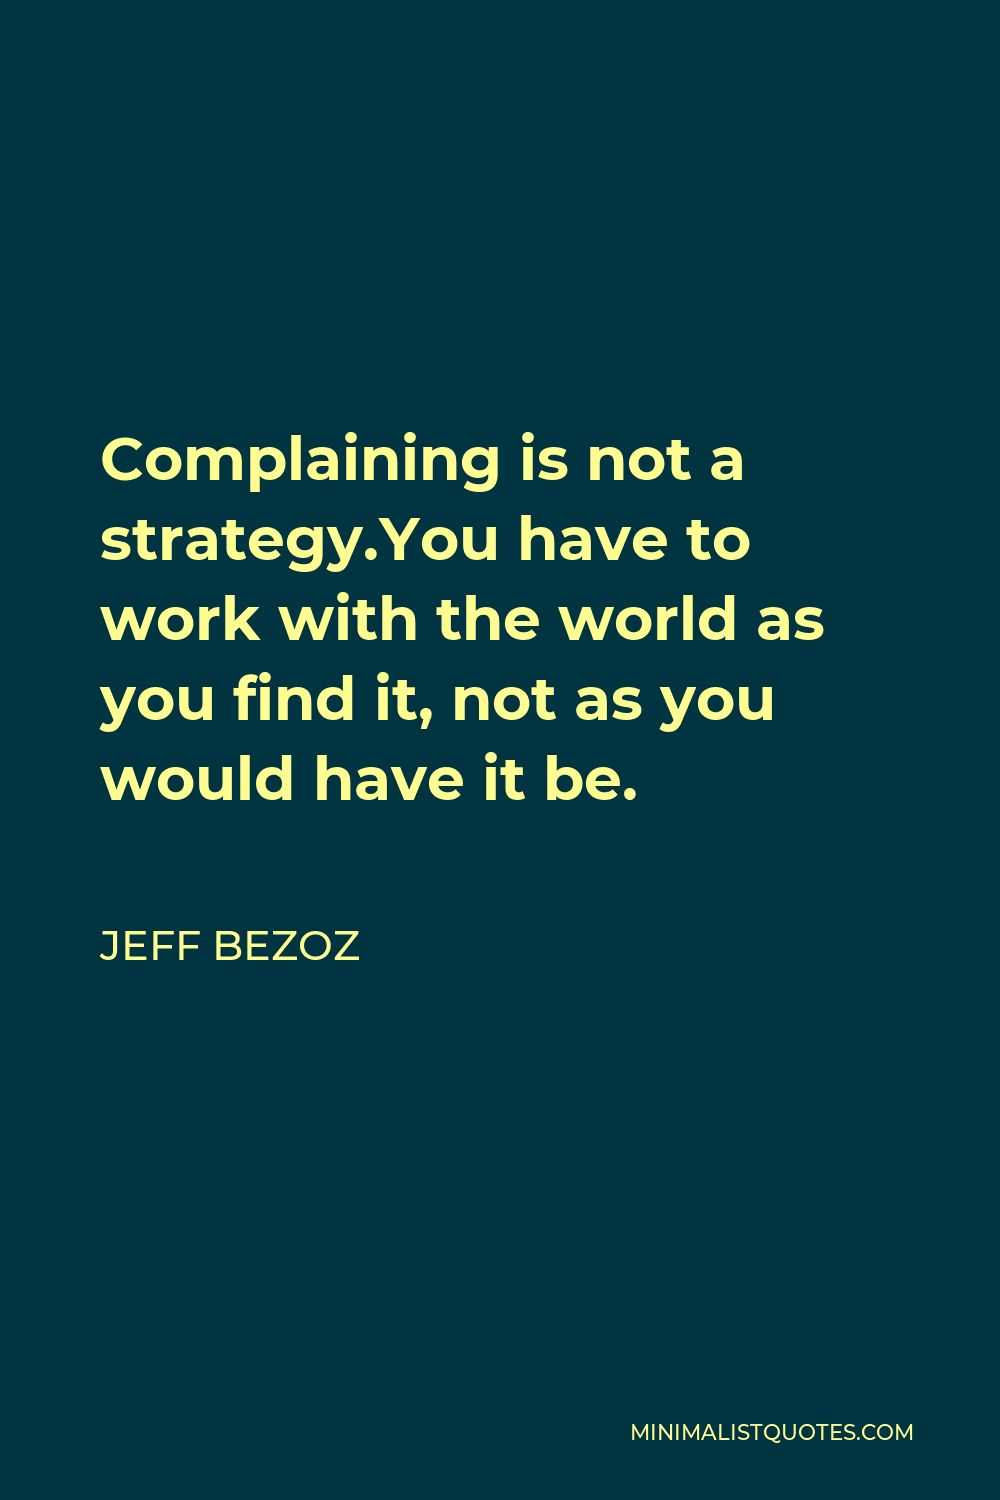 Jeff Bezoz Quote - Complaining is not a strategy.You have to work with the world as you find it, not as you would have it be.